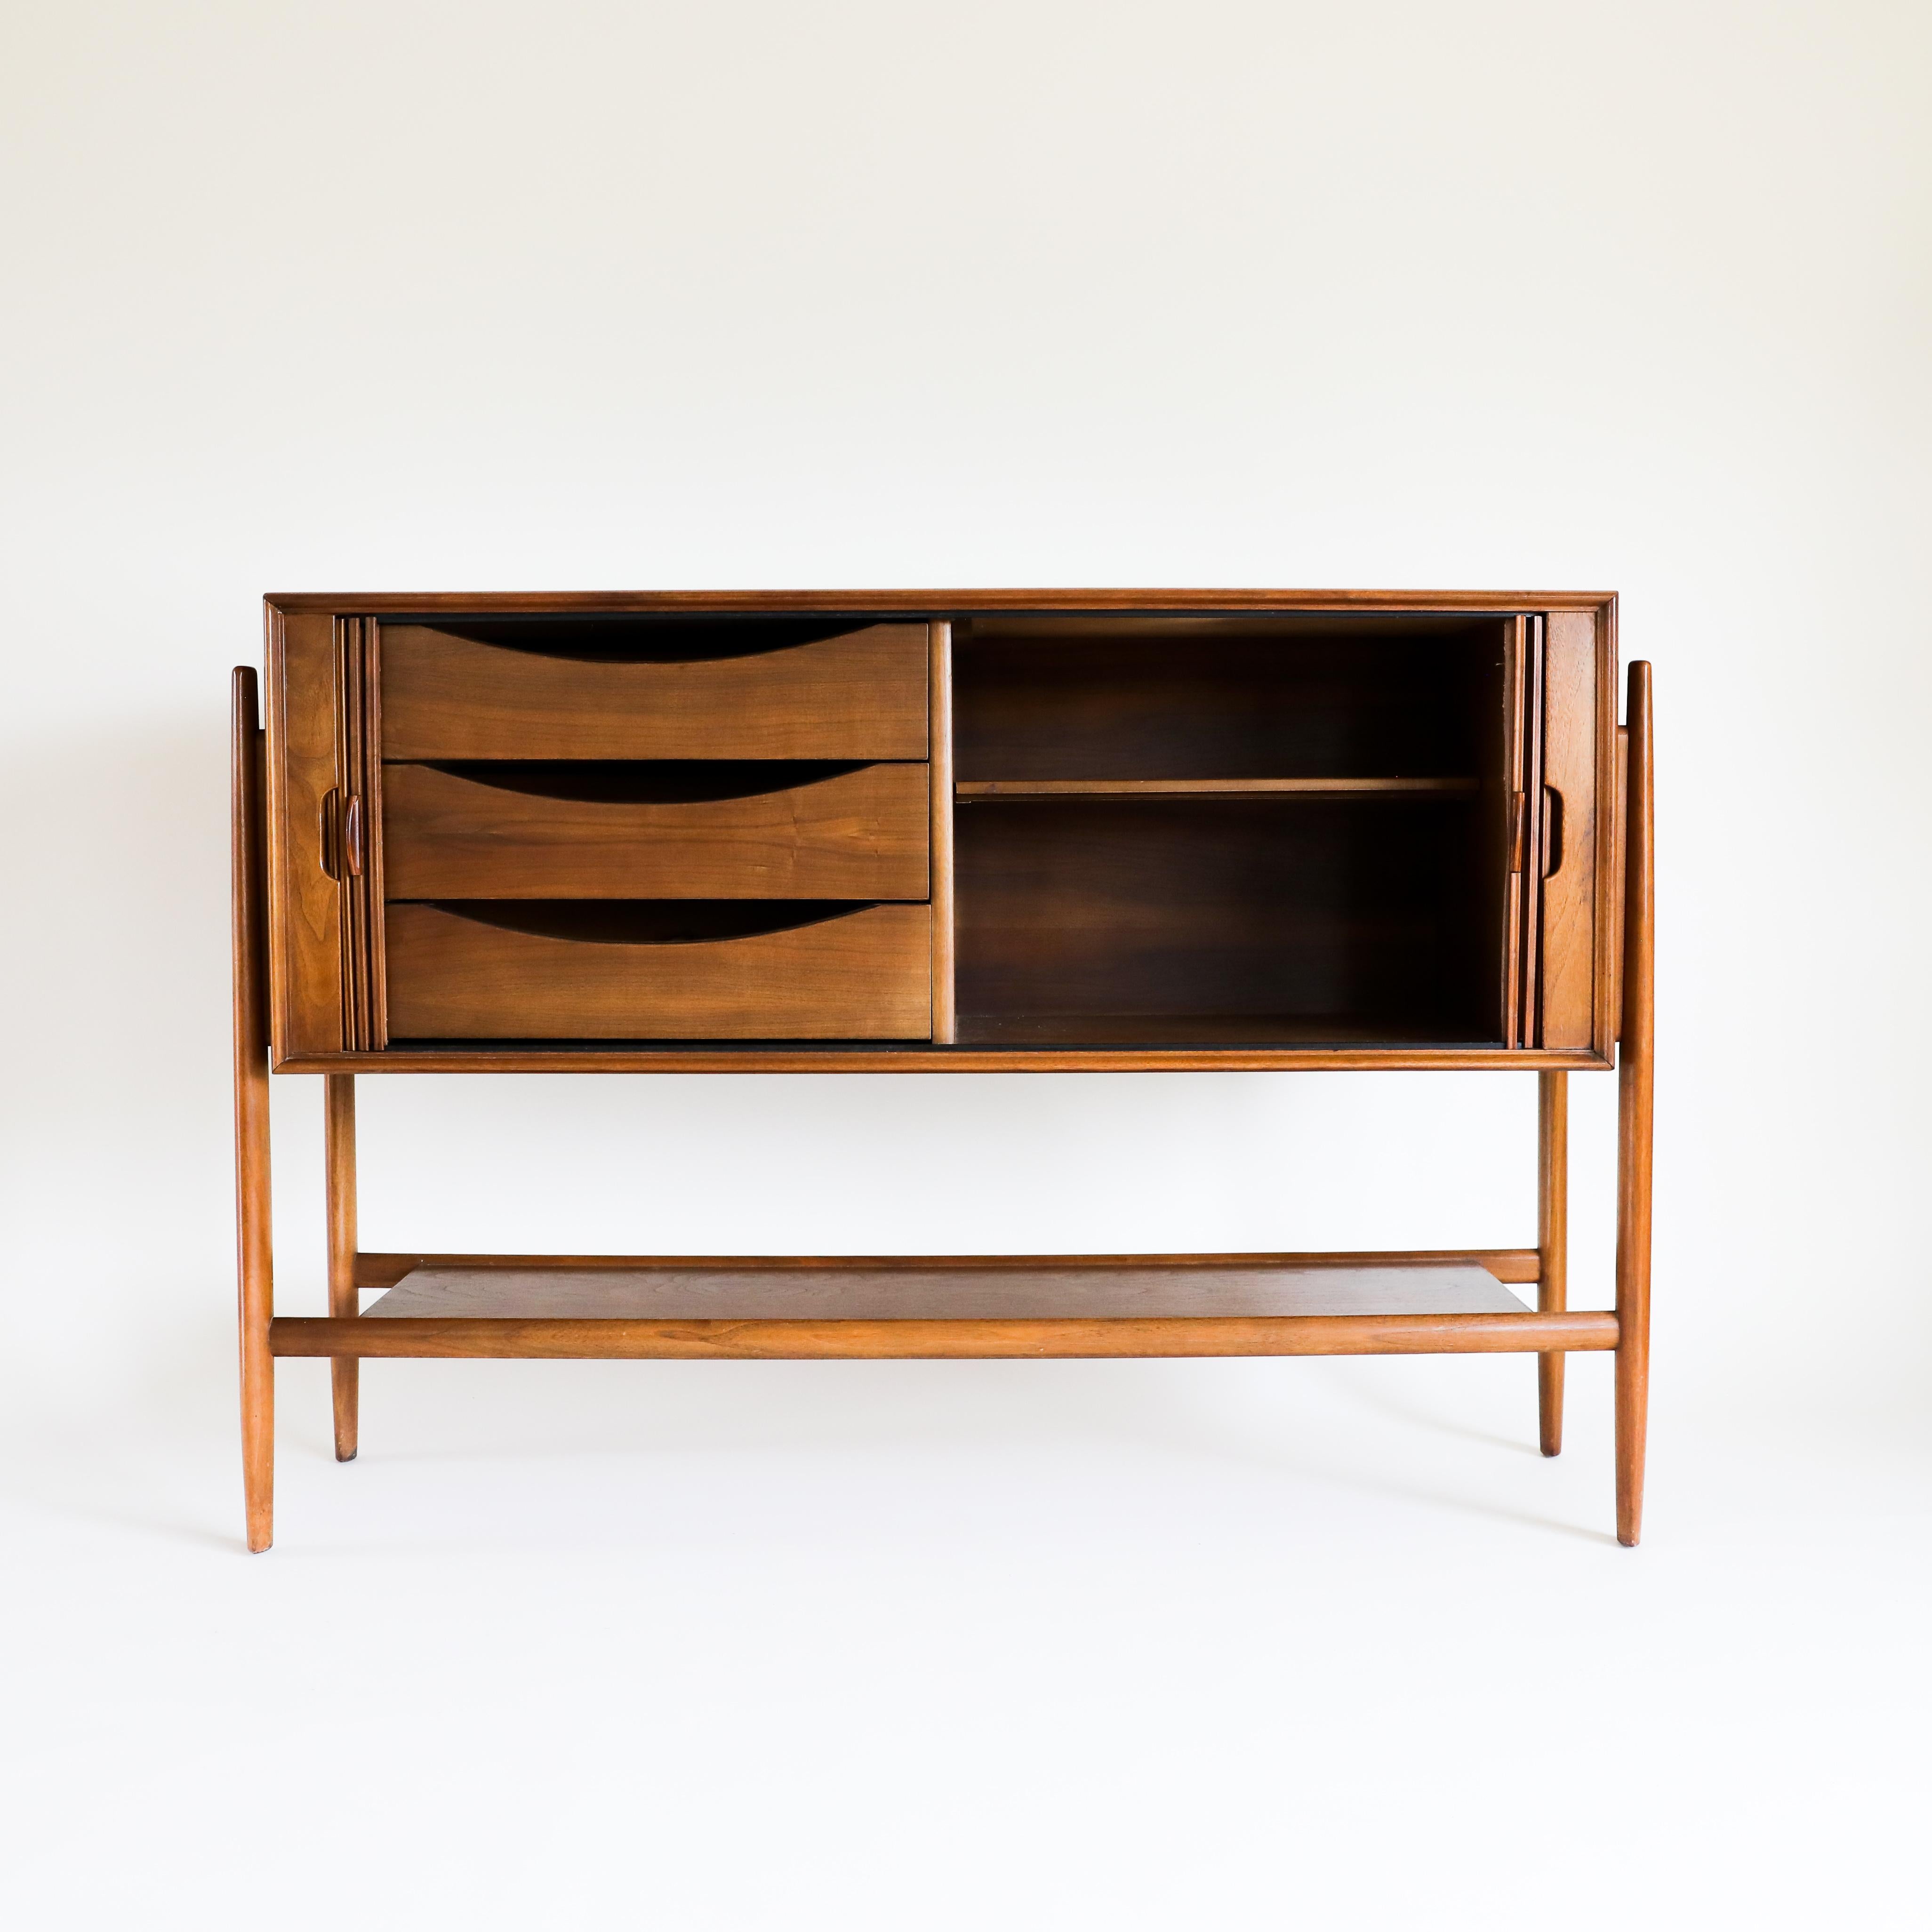 A rare and exceptional Mid-Century Modern walnut tambour door sideboard or credenza designed by Barney Flagg for the Parallel line by Drexel. The credenza features gorgeous walnut wood grain and sleek exoskeletal legs and the honey golden hue that